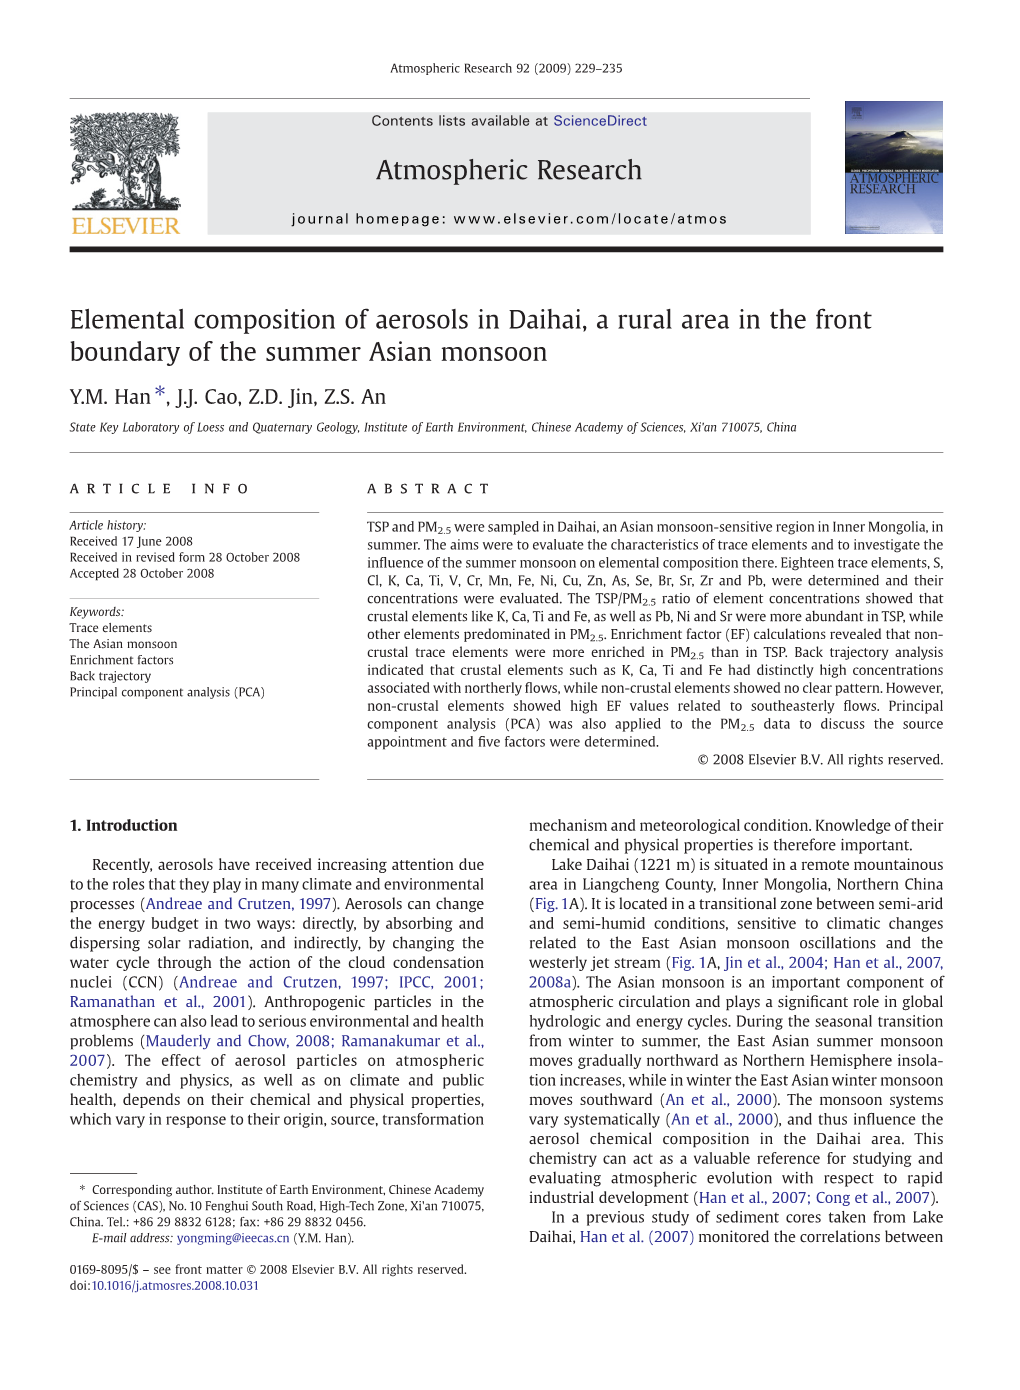 Elemental Composition of Aerosols in Daihai, a Rural Area in the Front Boundary of the Summer Asian Monsoon